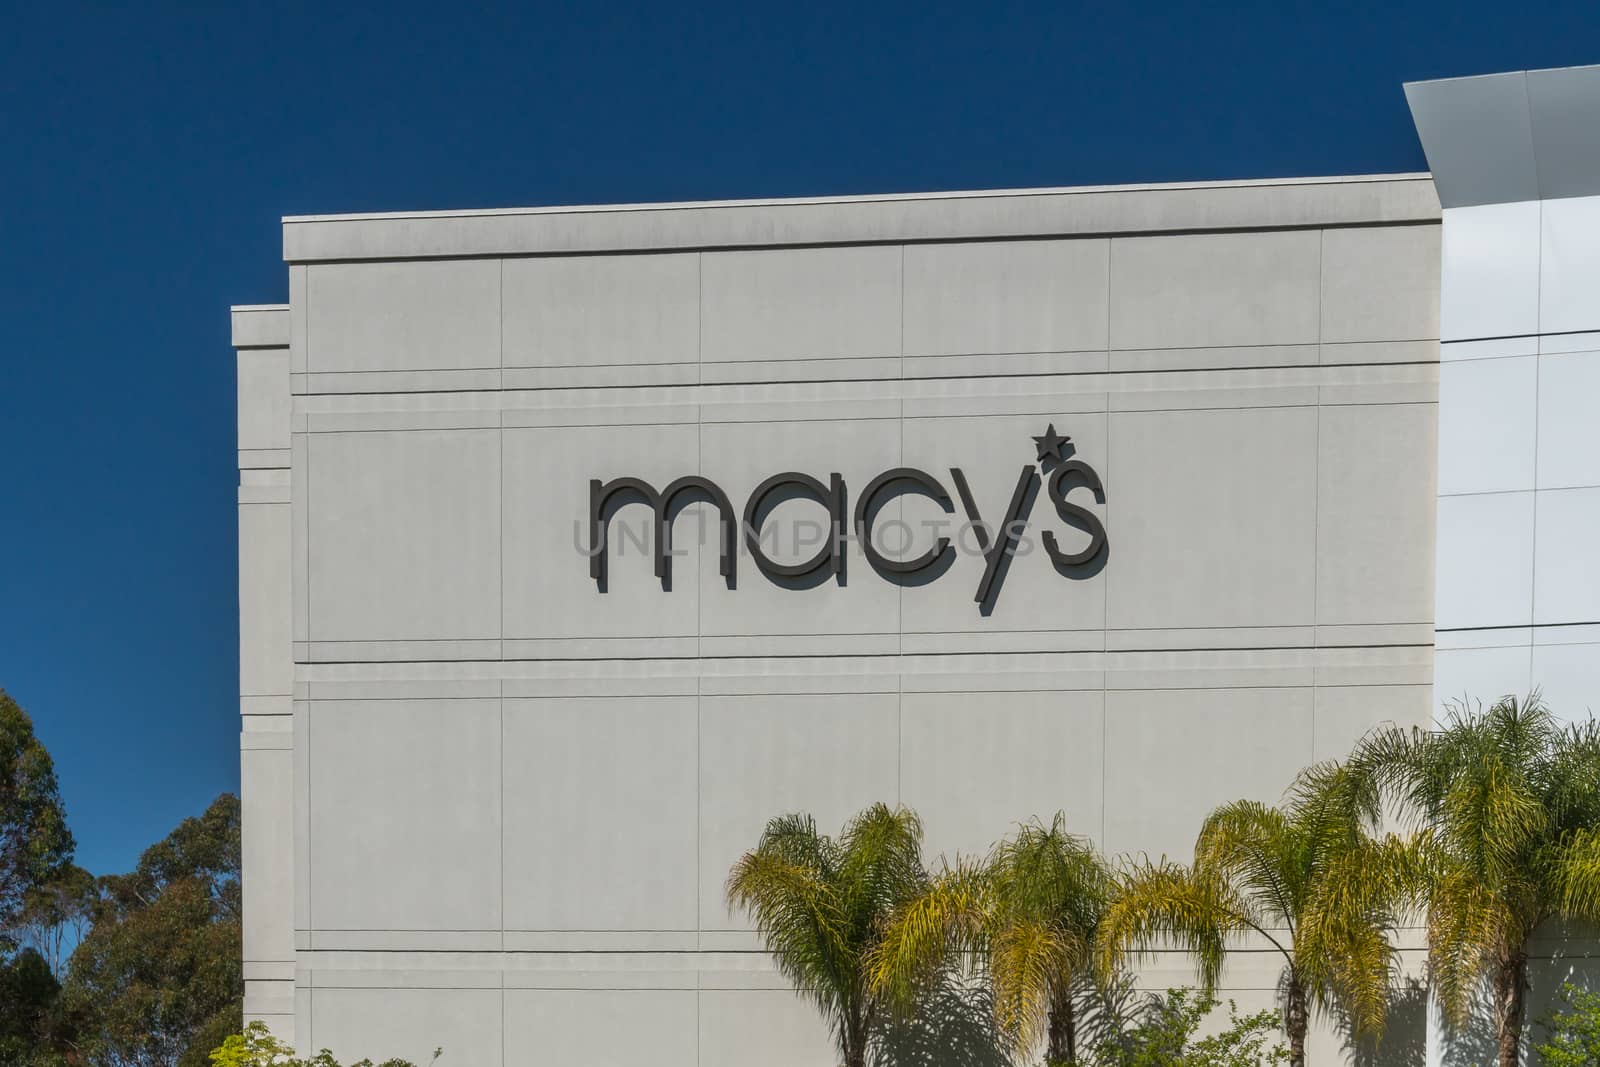 Macy's Department Store Exterior and Logo by wolterk